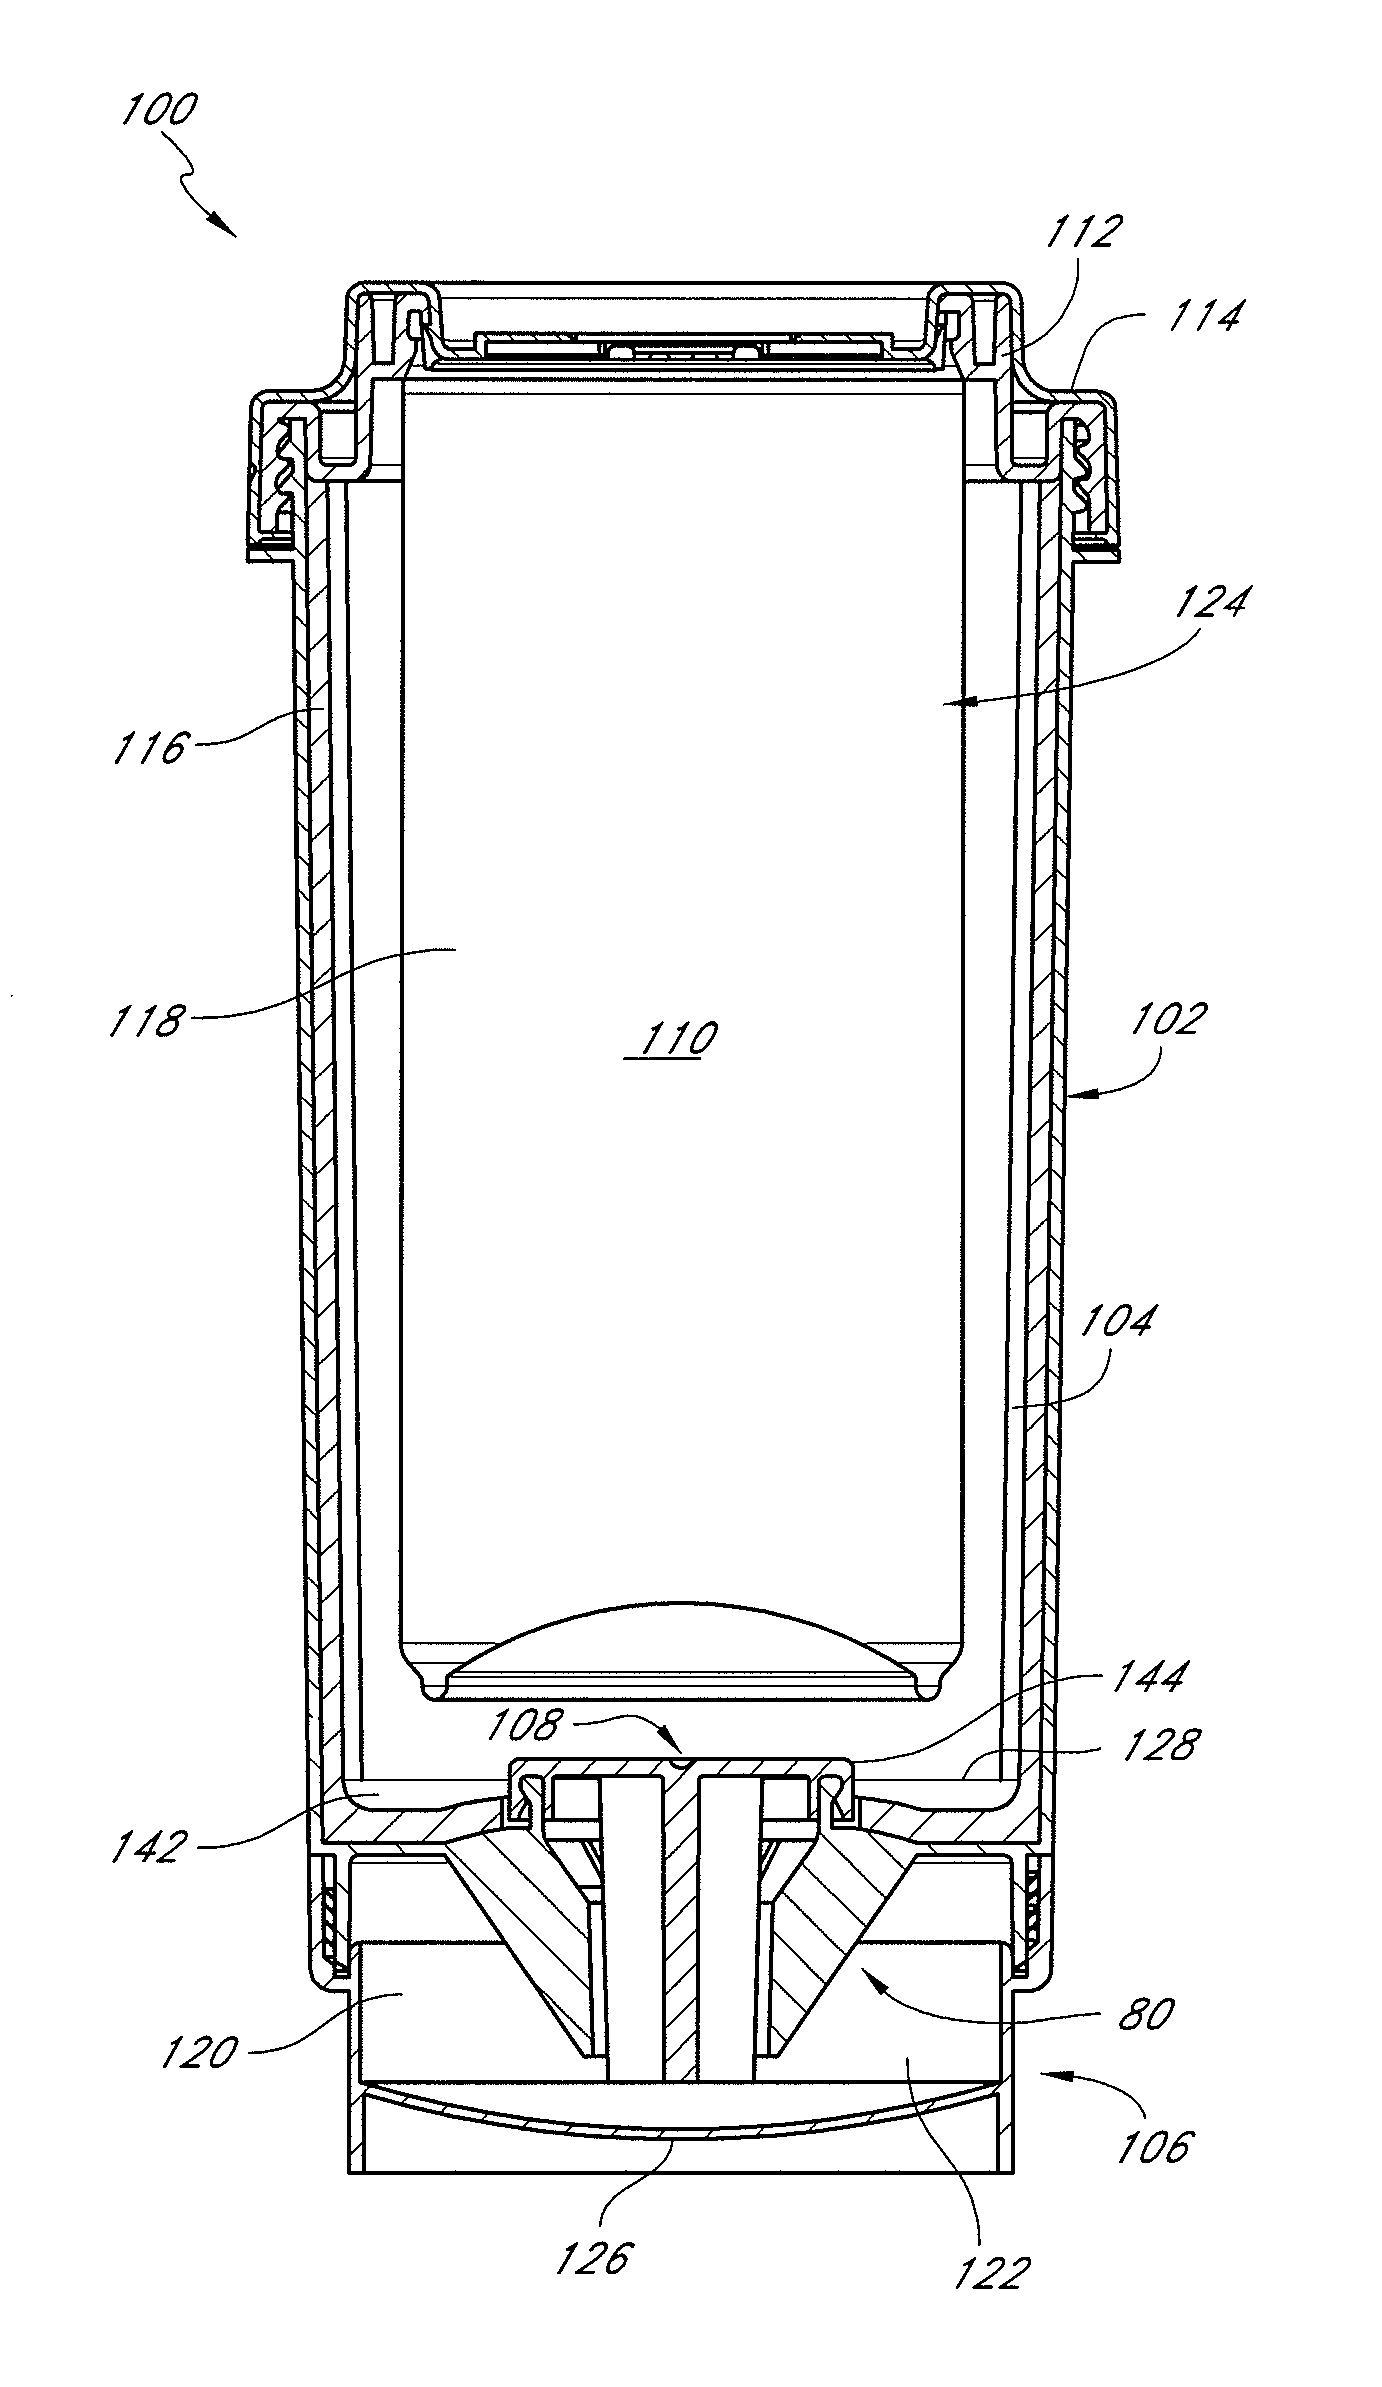 Self-cooling compositions, systems and methods